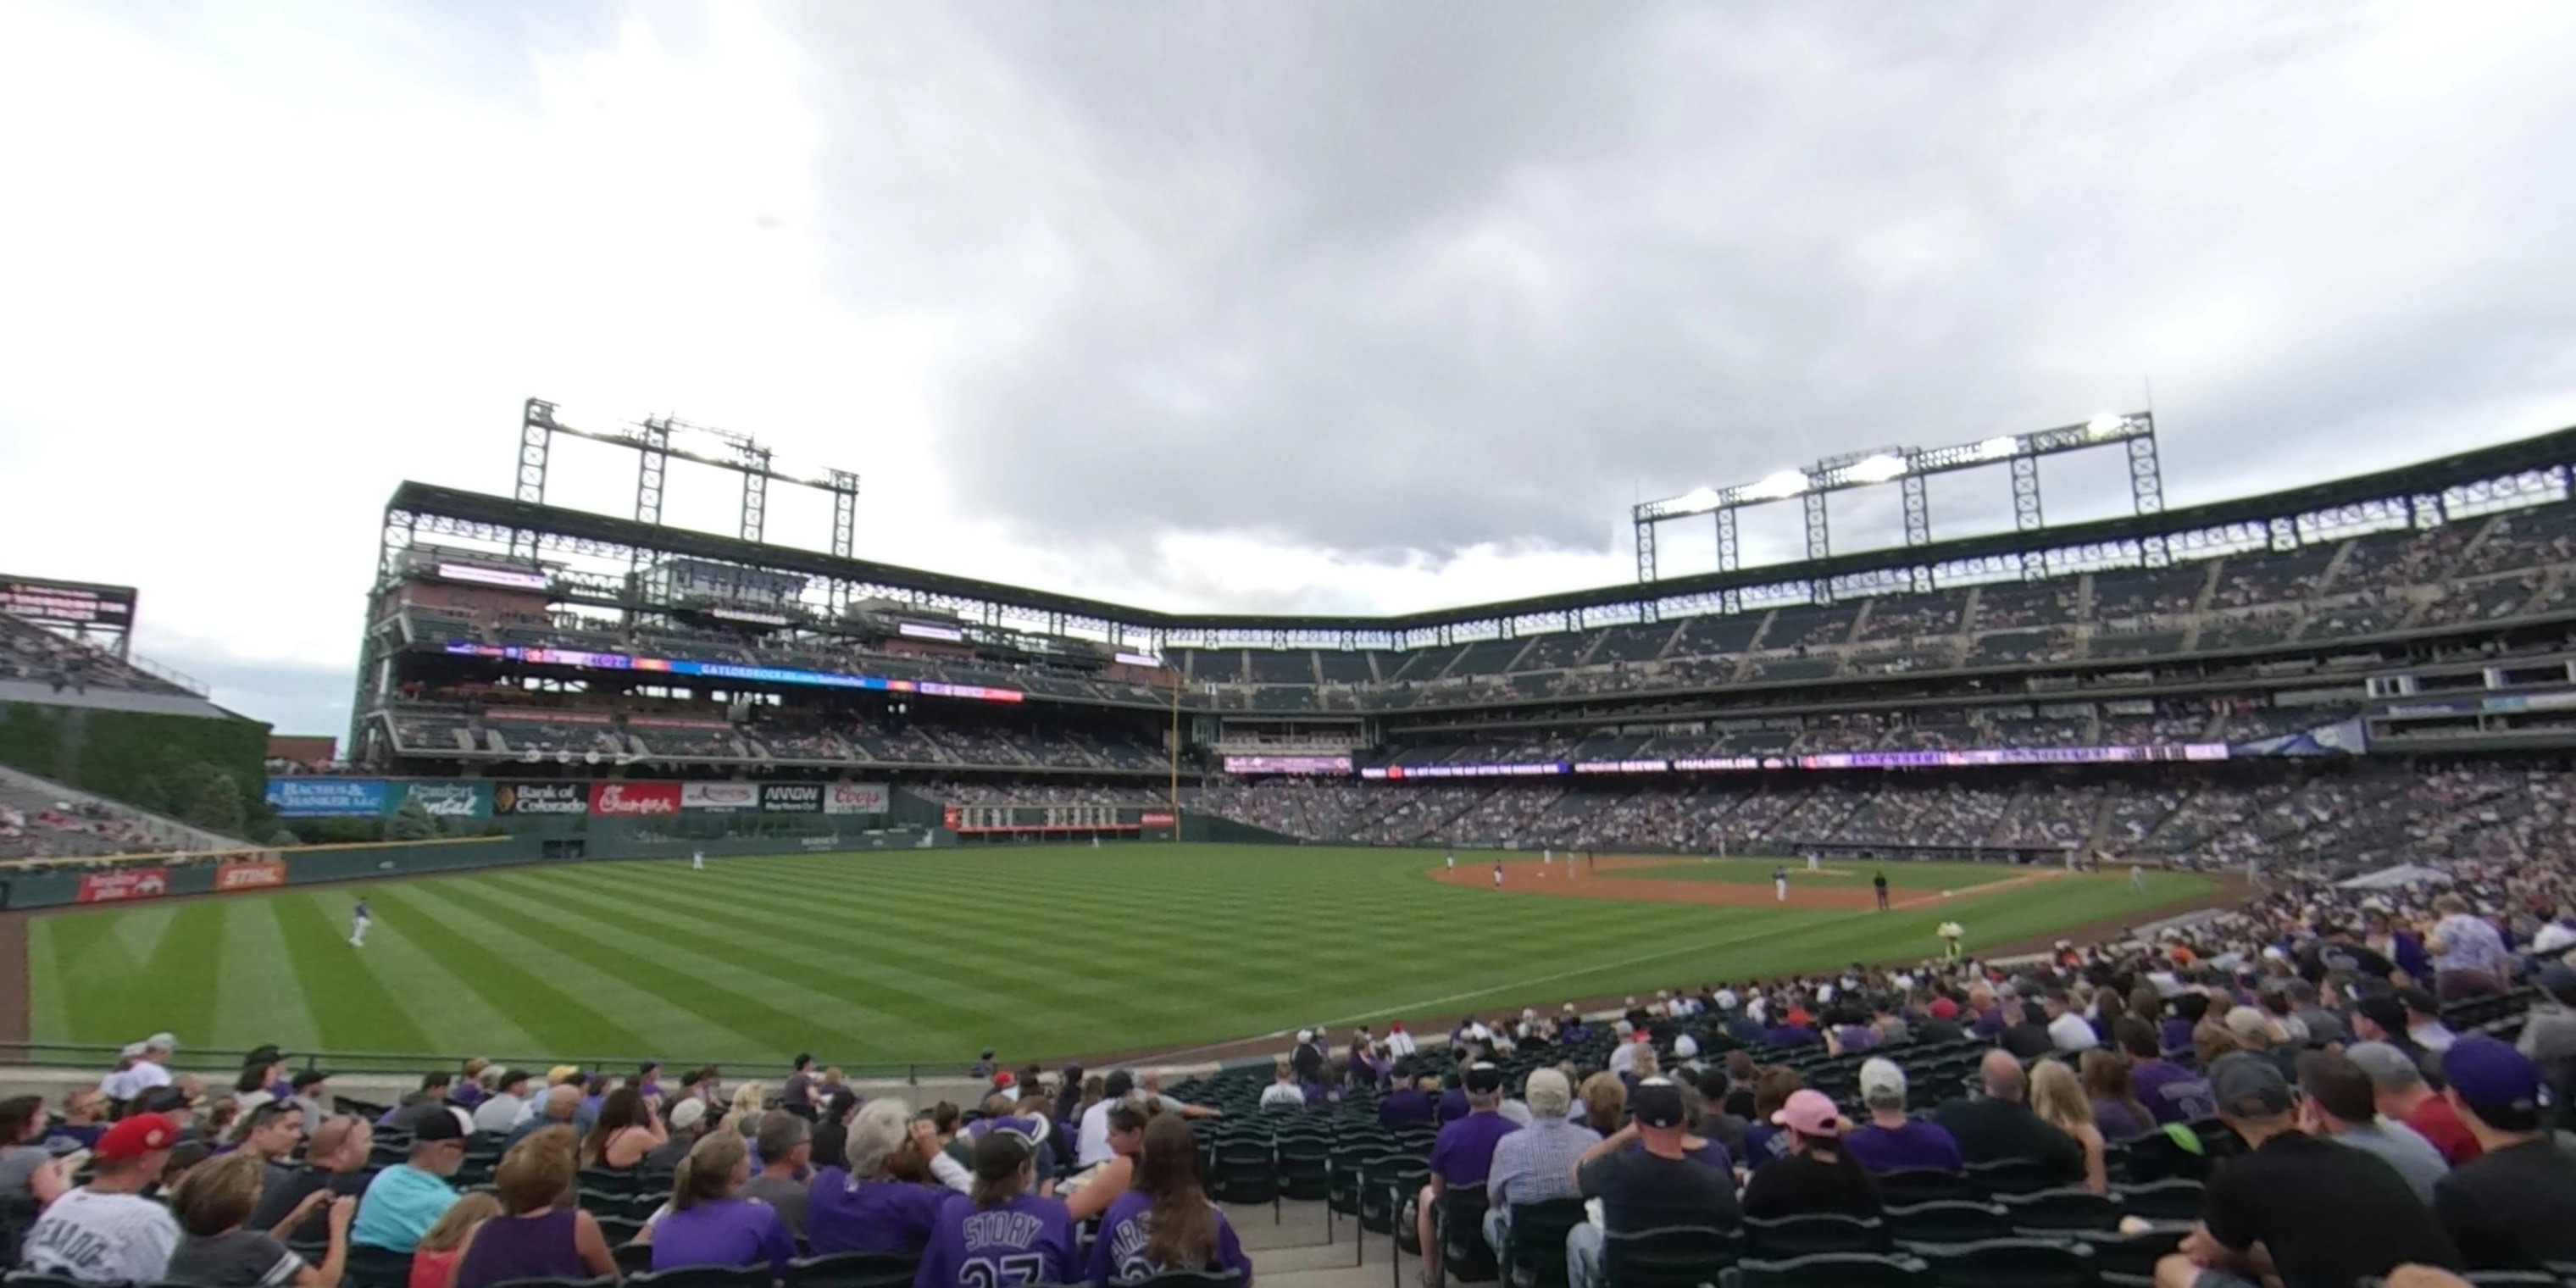 section 147 panoramic seat view  - coors field